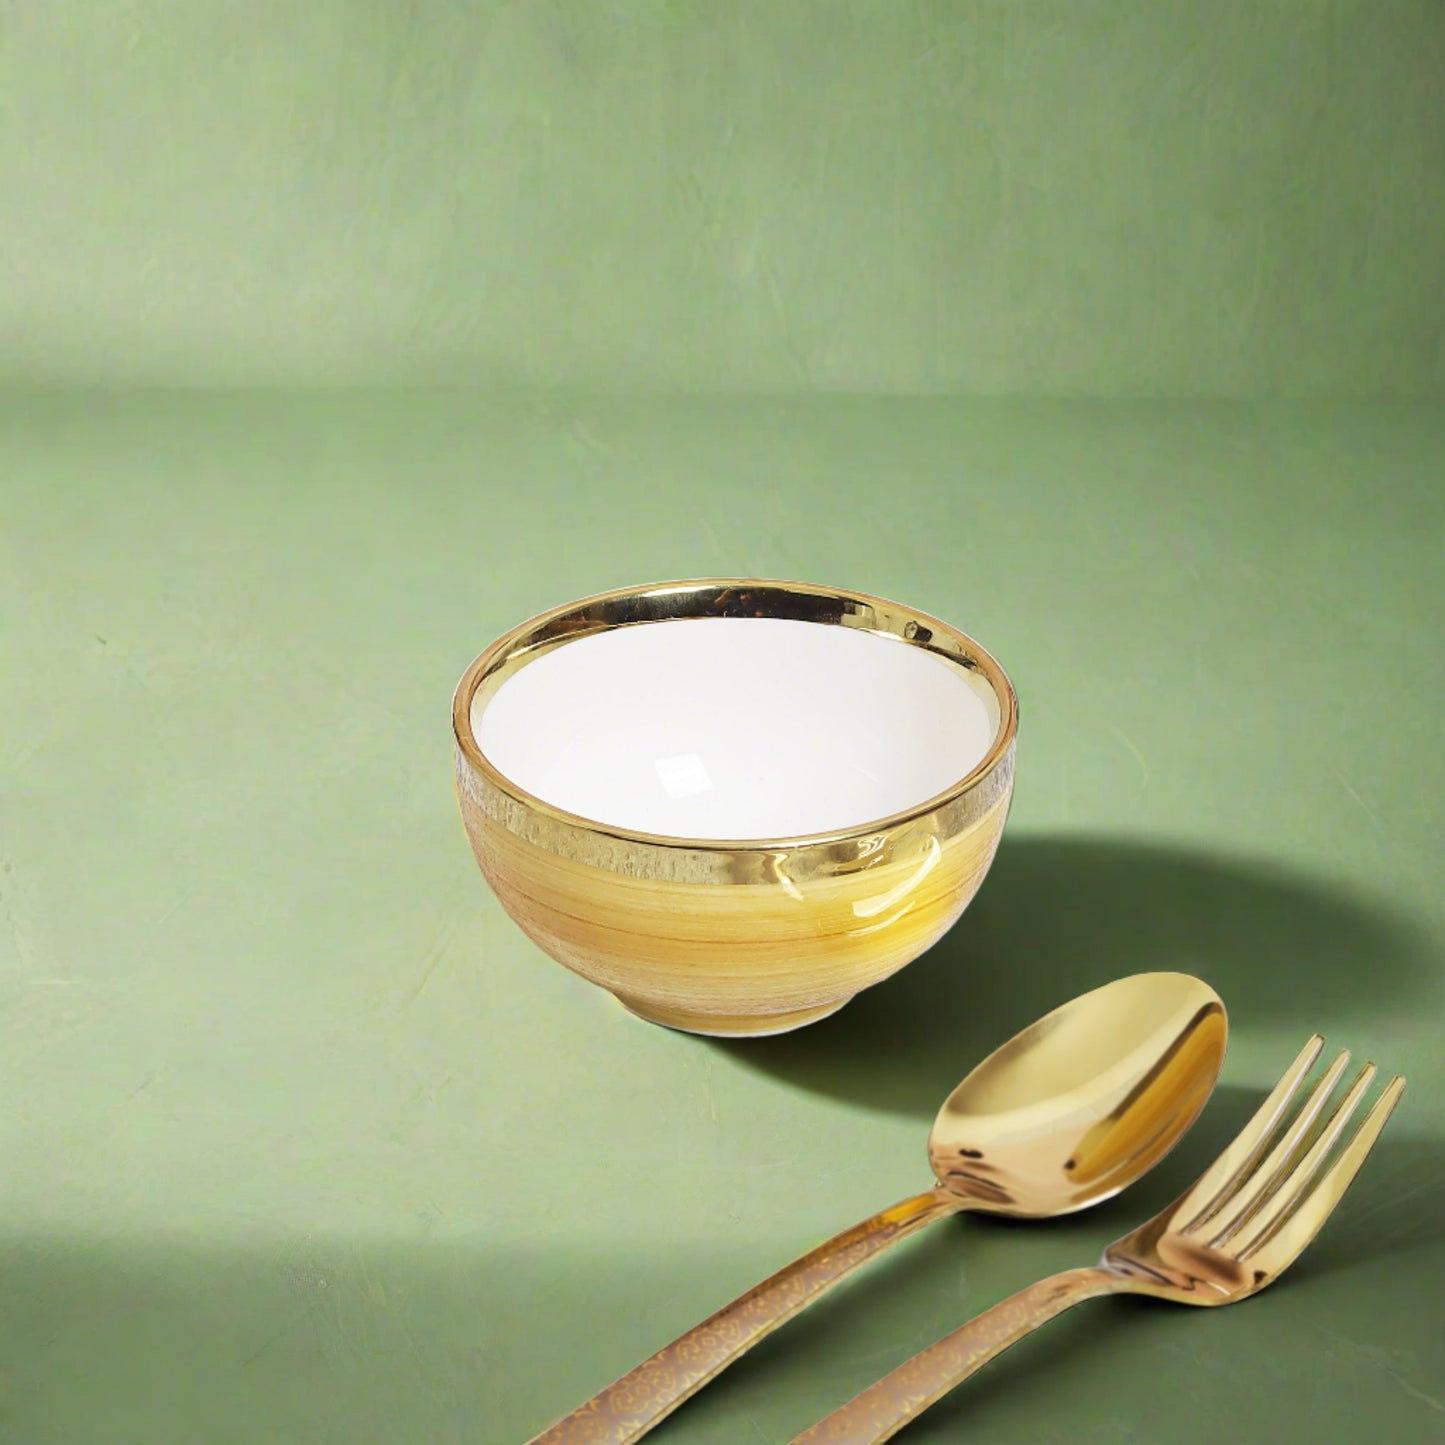 Versatile ceramic bowl, ideal for soups, salads, and desserts - timeless addition to your tableware